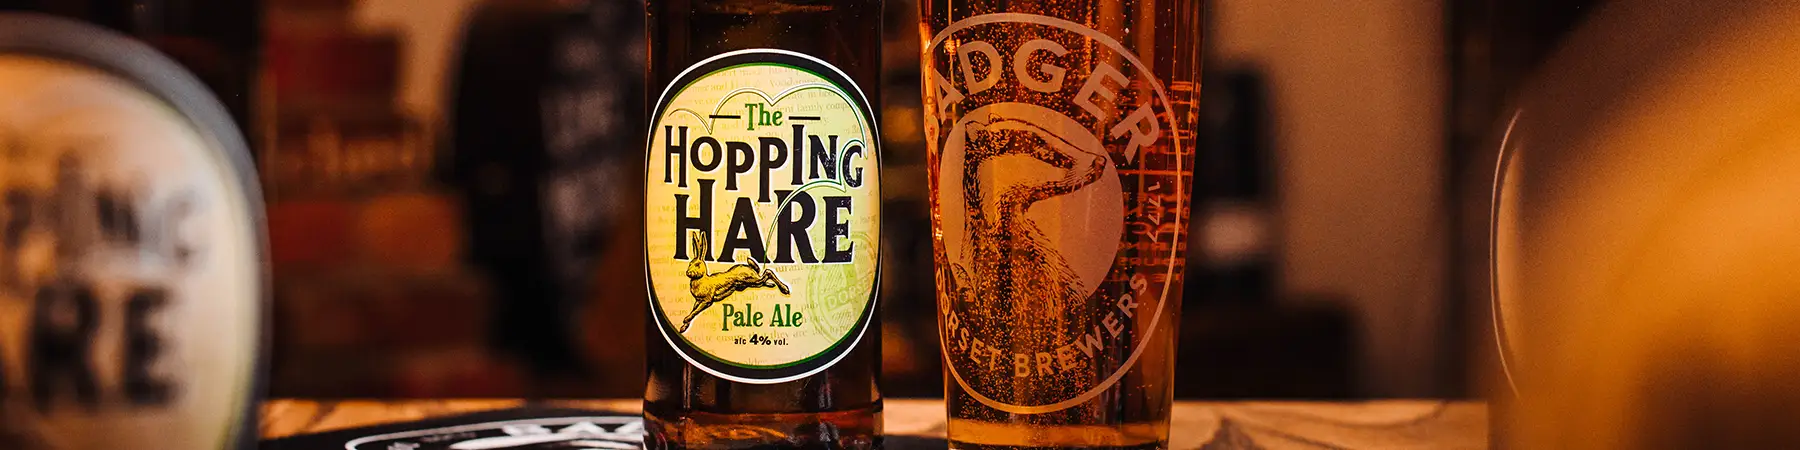 bottle and pint of badgers hopping hare on table